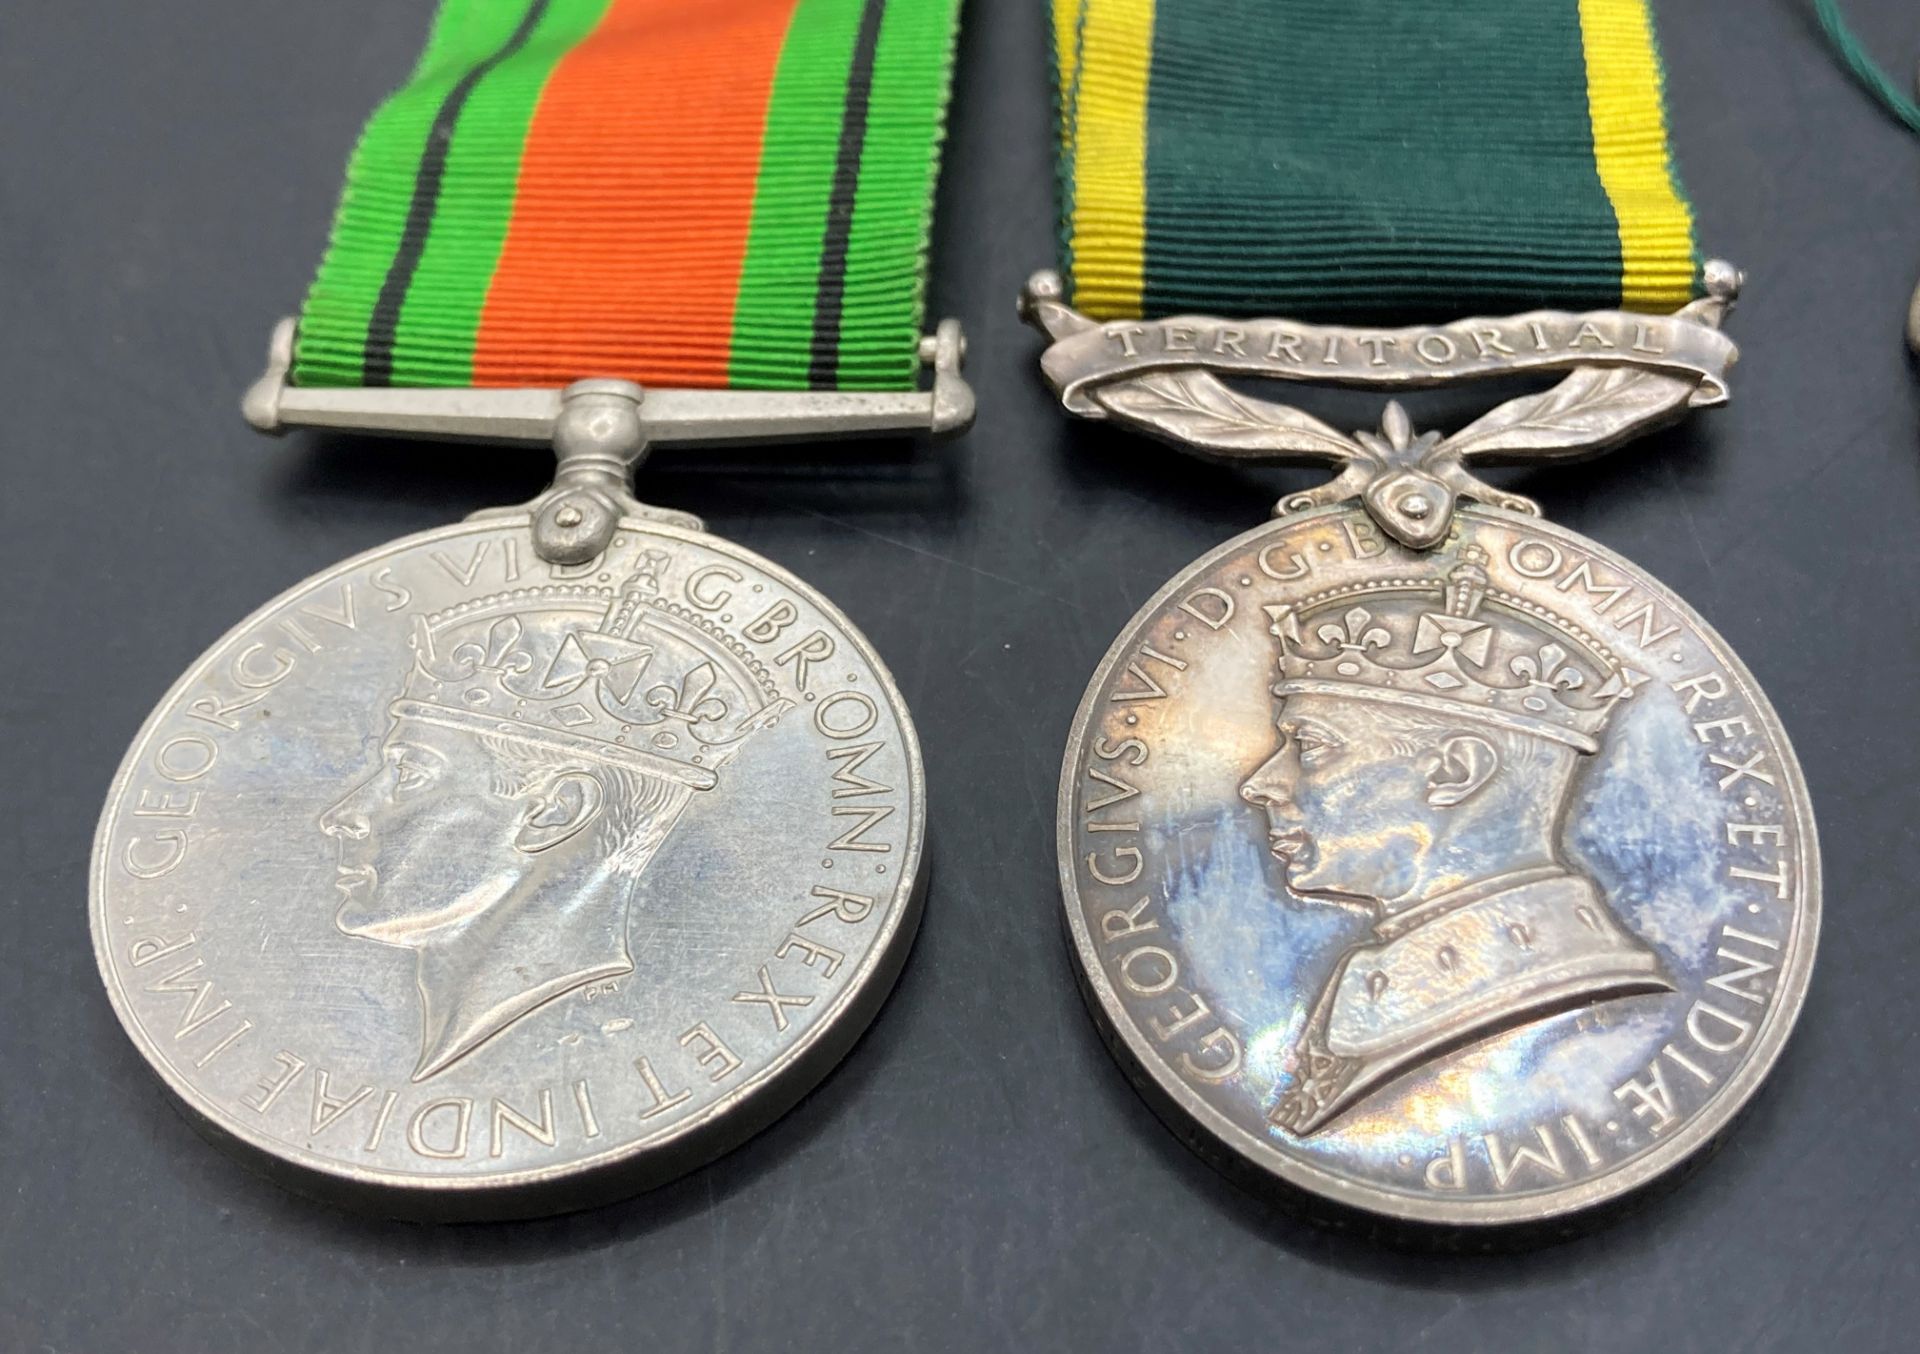 1939-1945 War Medal together with ribbon, ribbon for the 1939-1945 defence medal, - Image 2 of 4